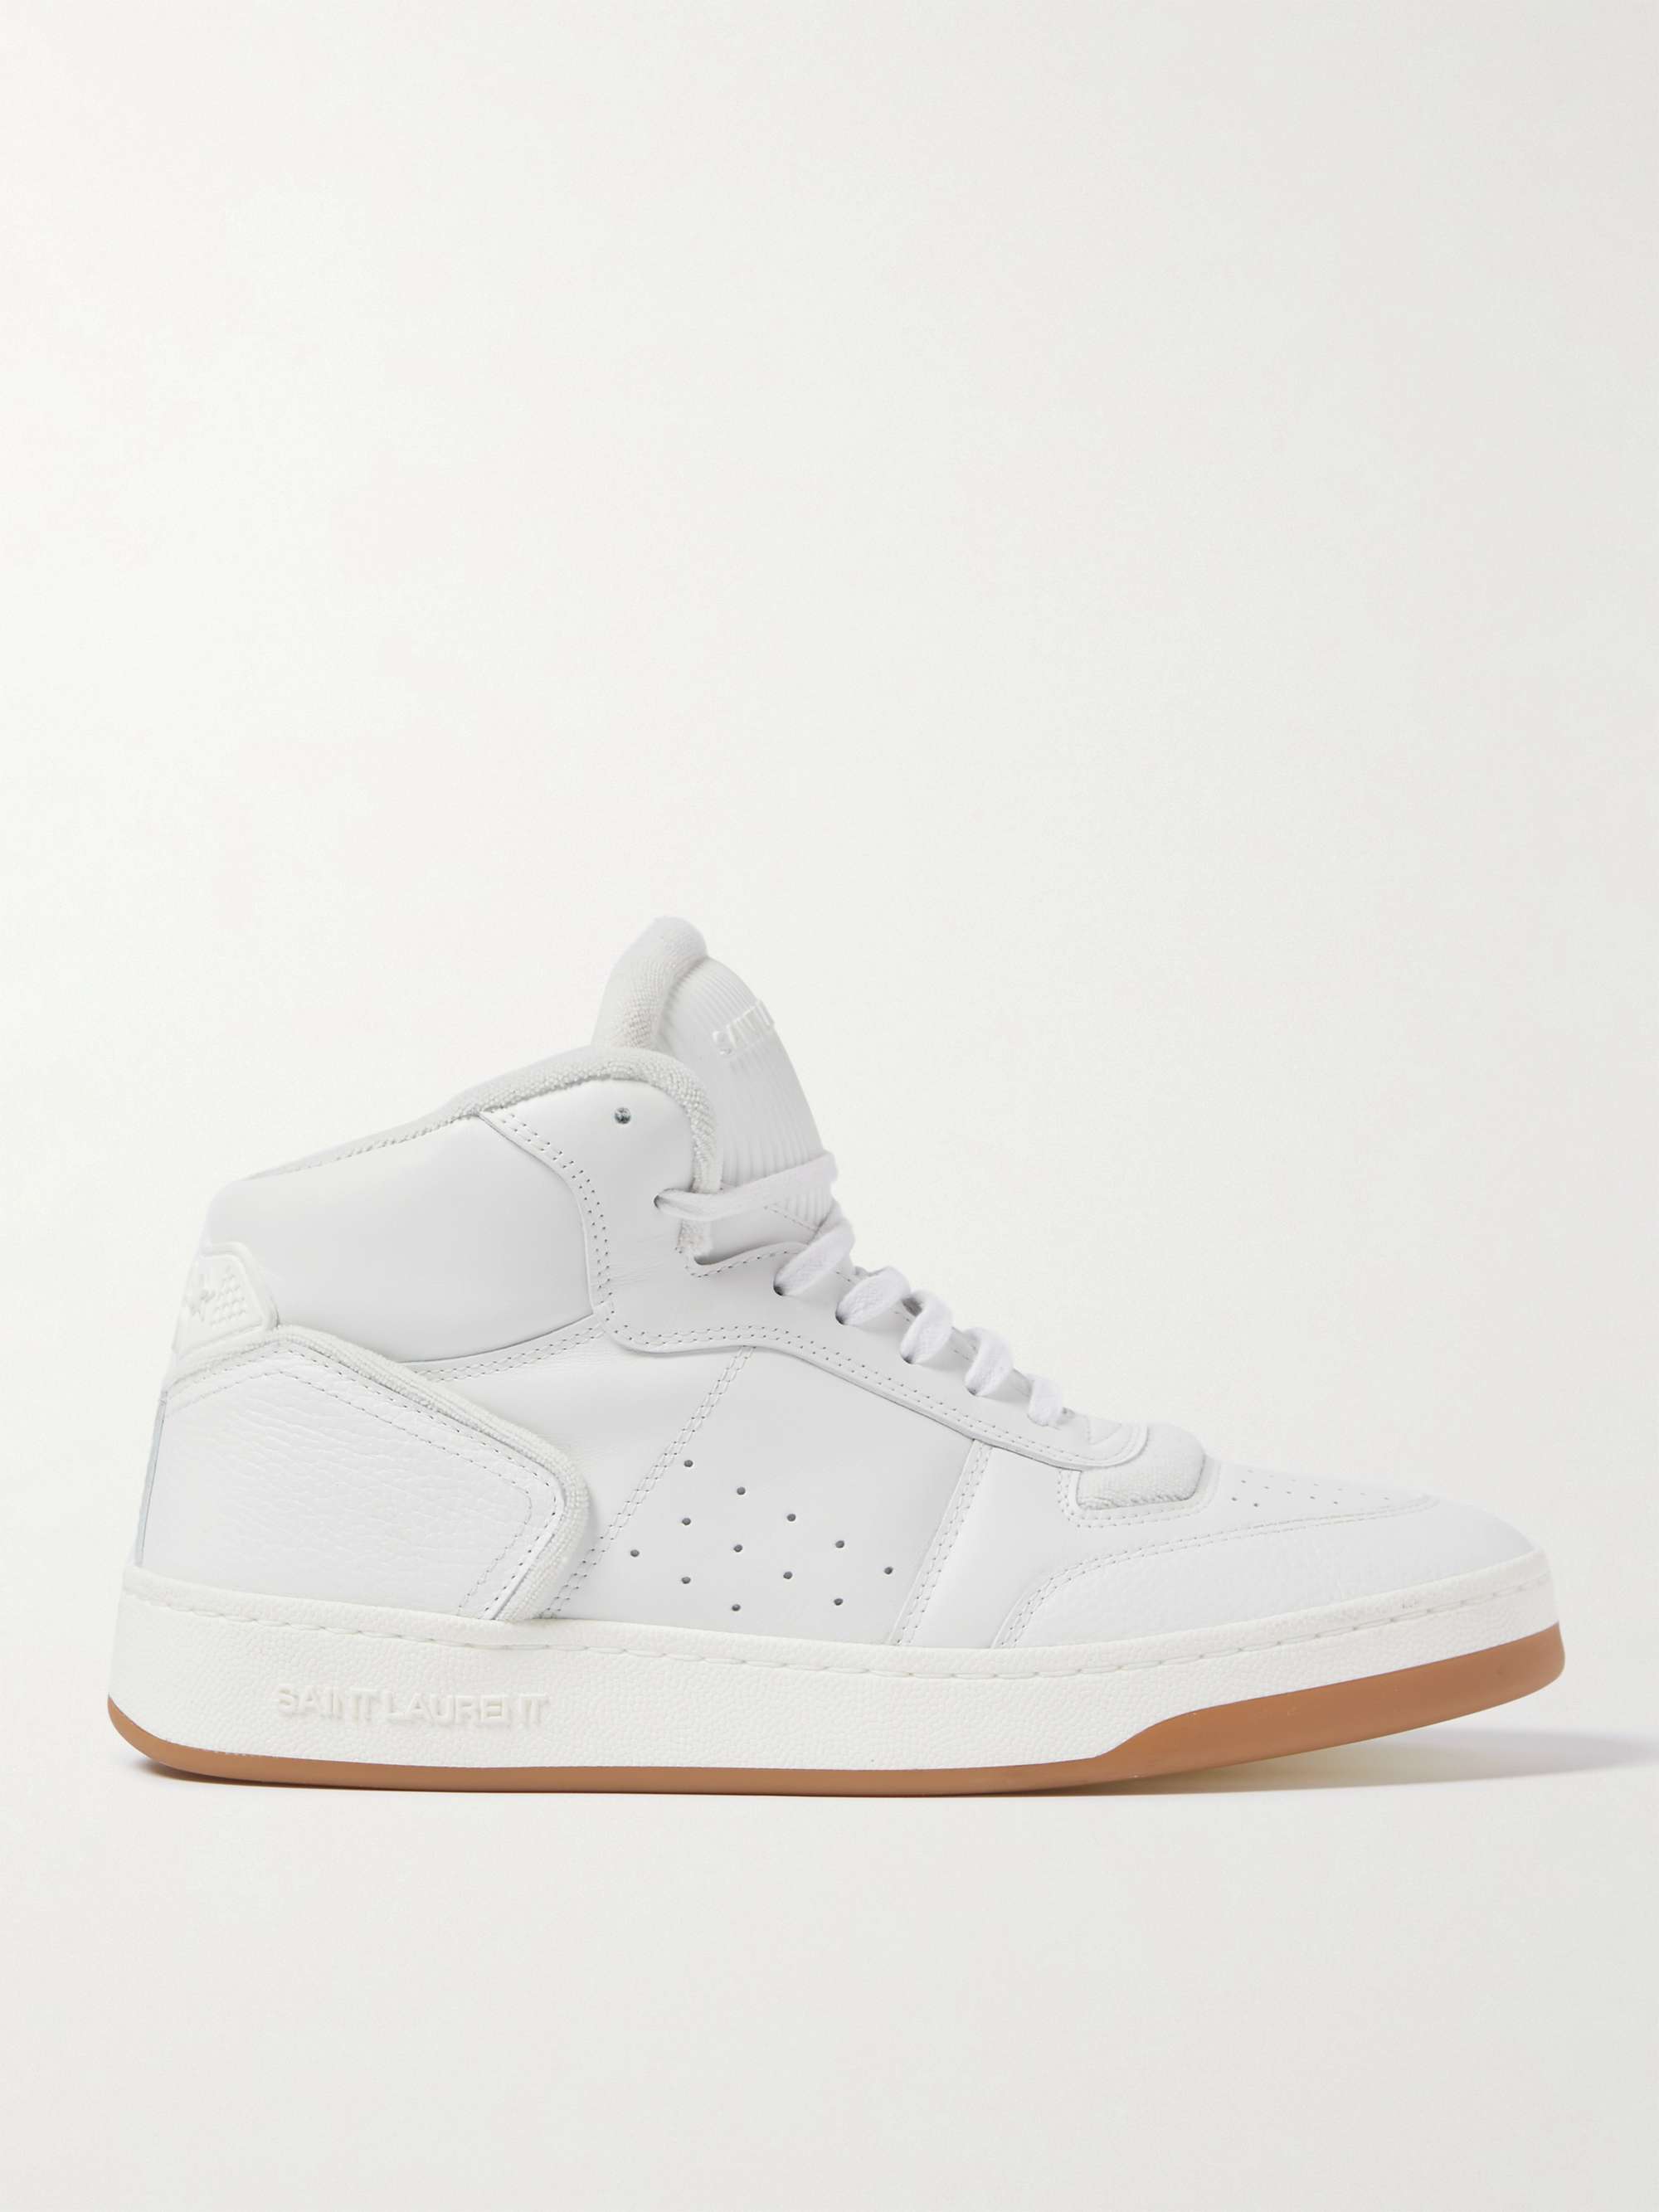 SAINT LAURENT SL/80 Perforated Leather High-Top Sneakers